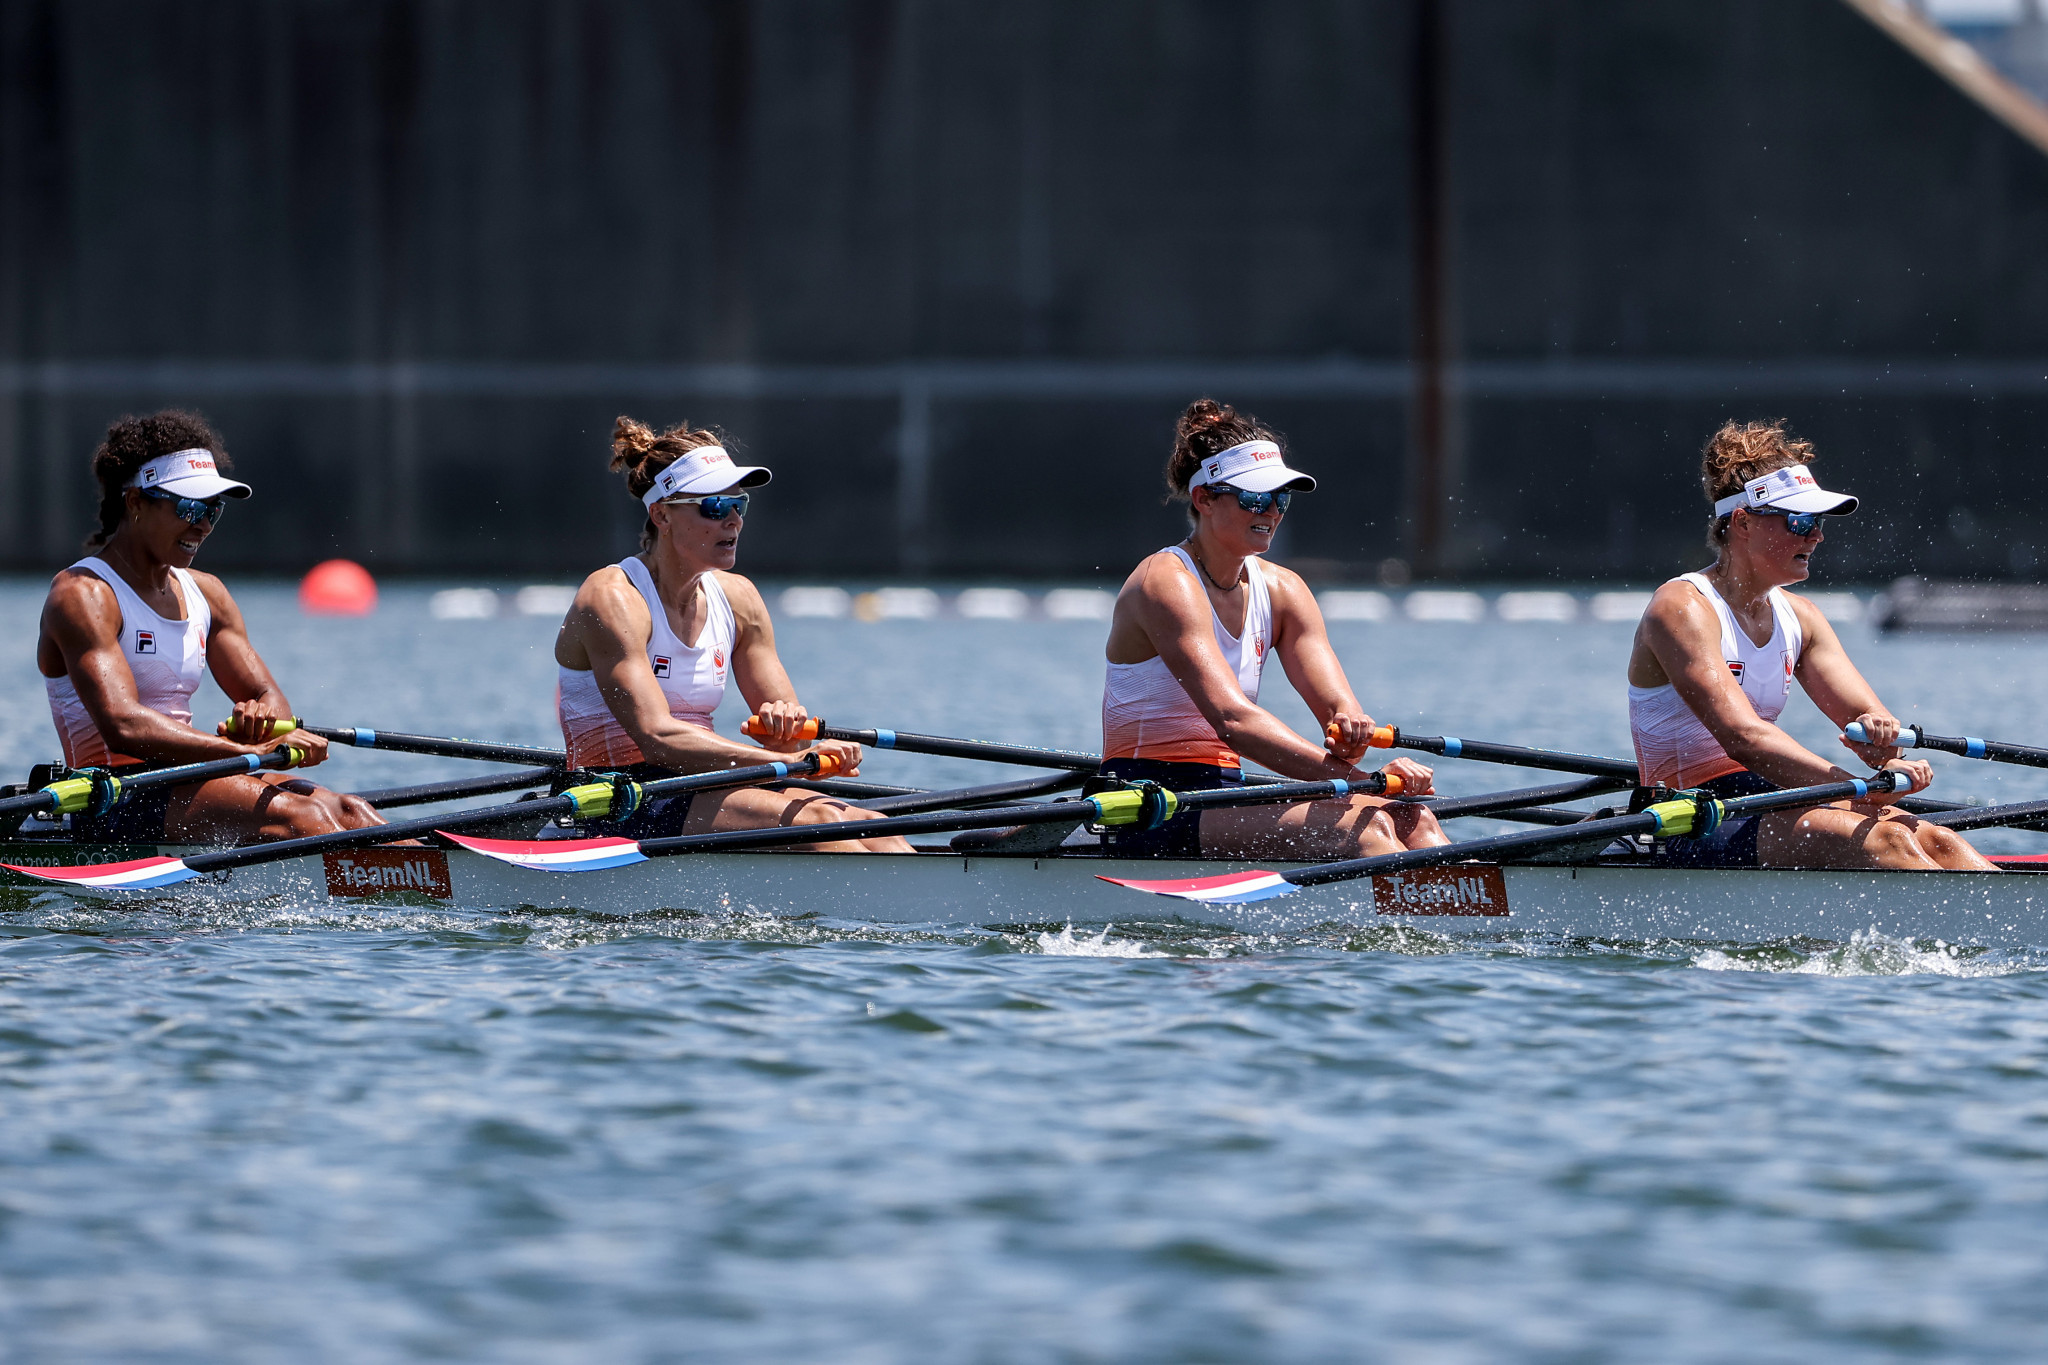 Rio 2016 women's quadruple sculls silver medallist Inge Janssen has taken over as chair of the NOC*NSF Athletes' Committee ©Getty Images